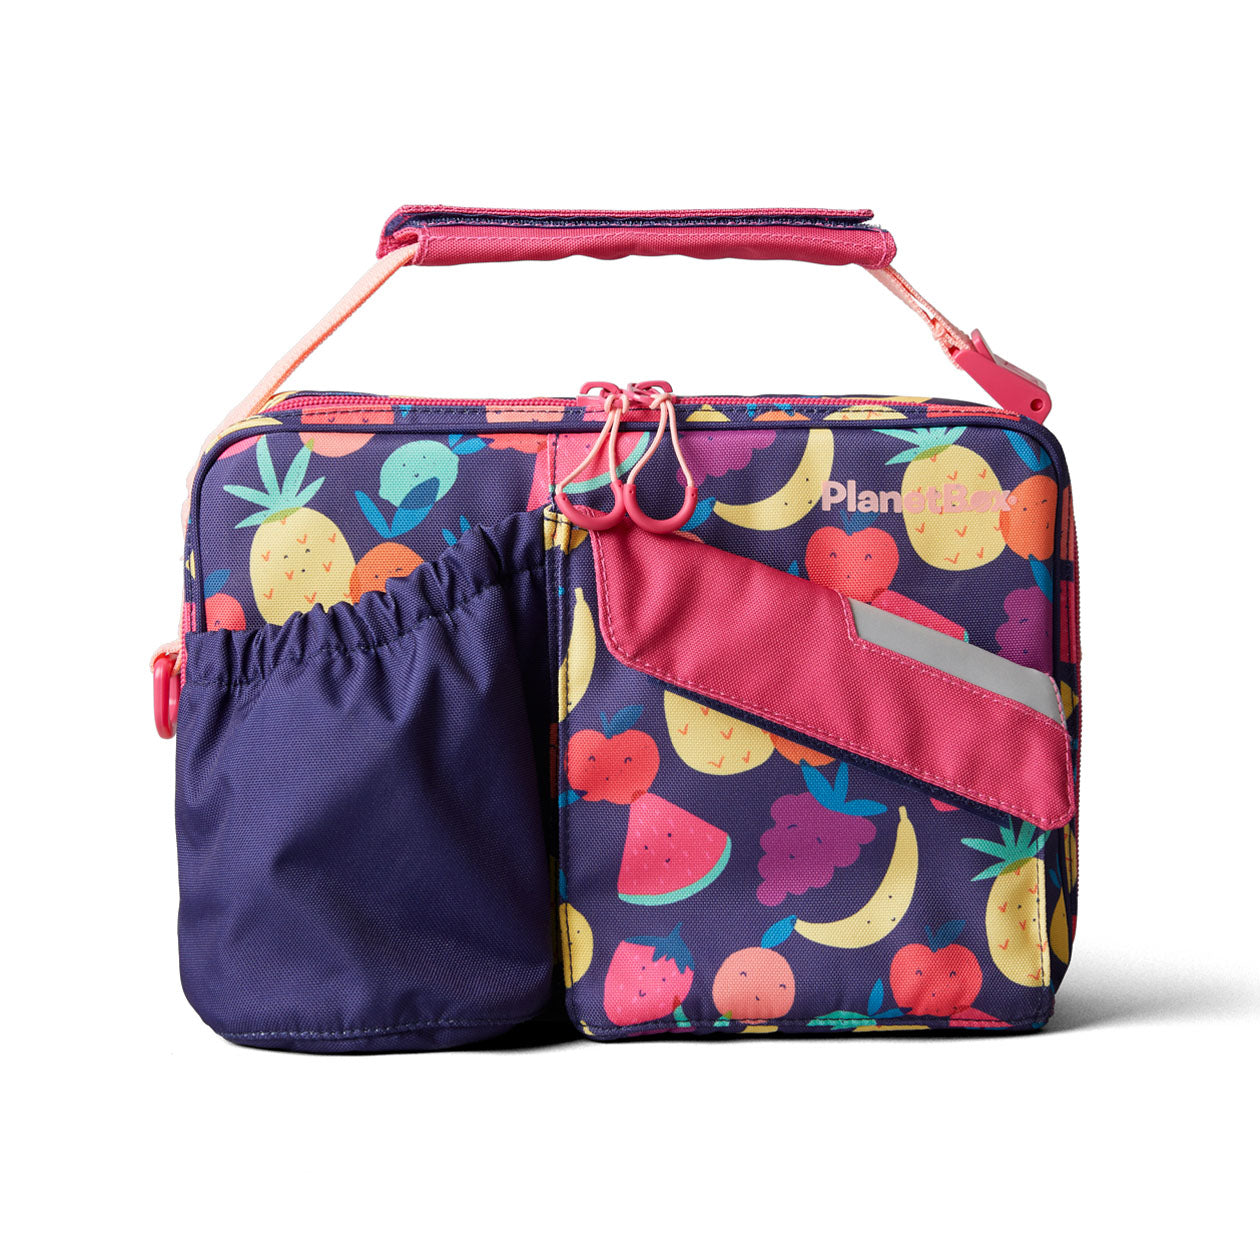 PlanetBox Insulated Carry Bag for Rover or Launch: Tutti Frutti Lunch Bag by PlanetBox | Cute Kid Stuff